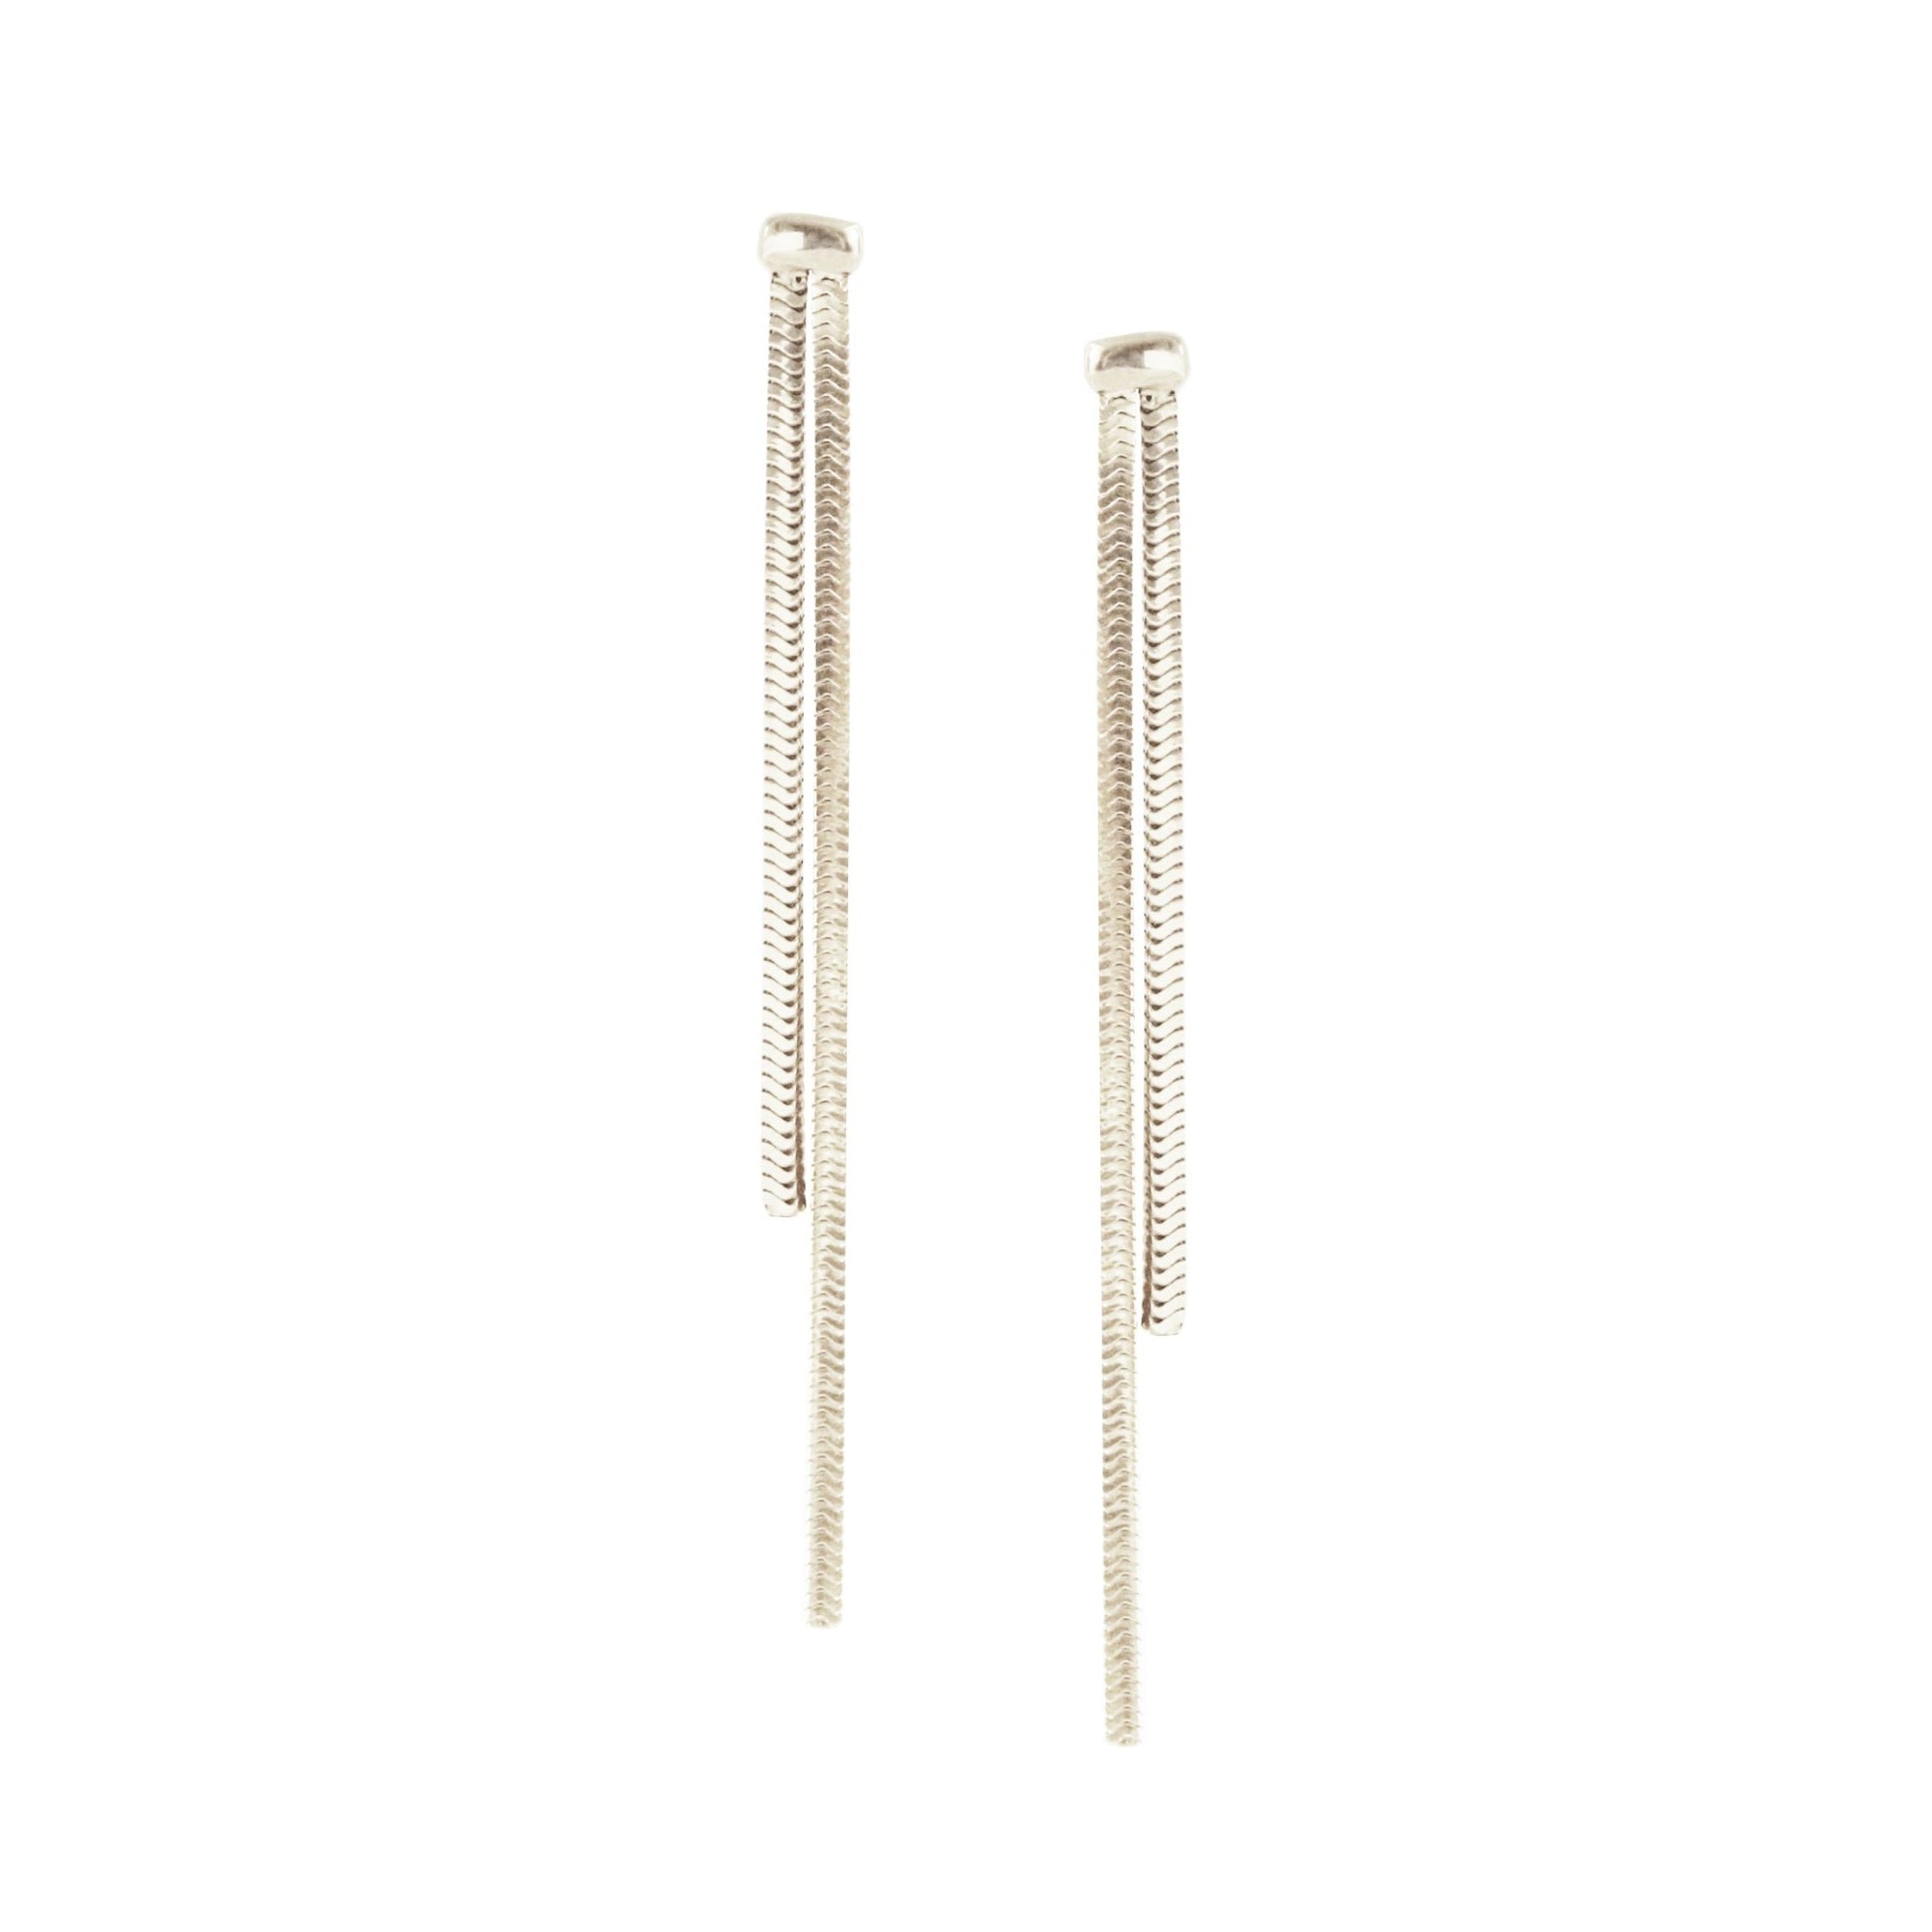 FEARLESS COBRA DUSTER EARRINGS - SILVER - SO PRETTY CARA COTTER